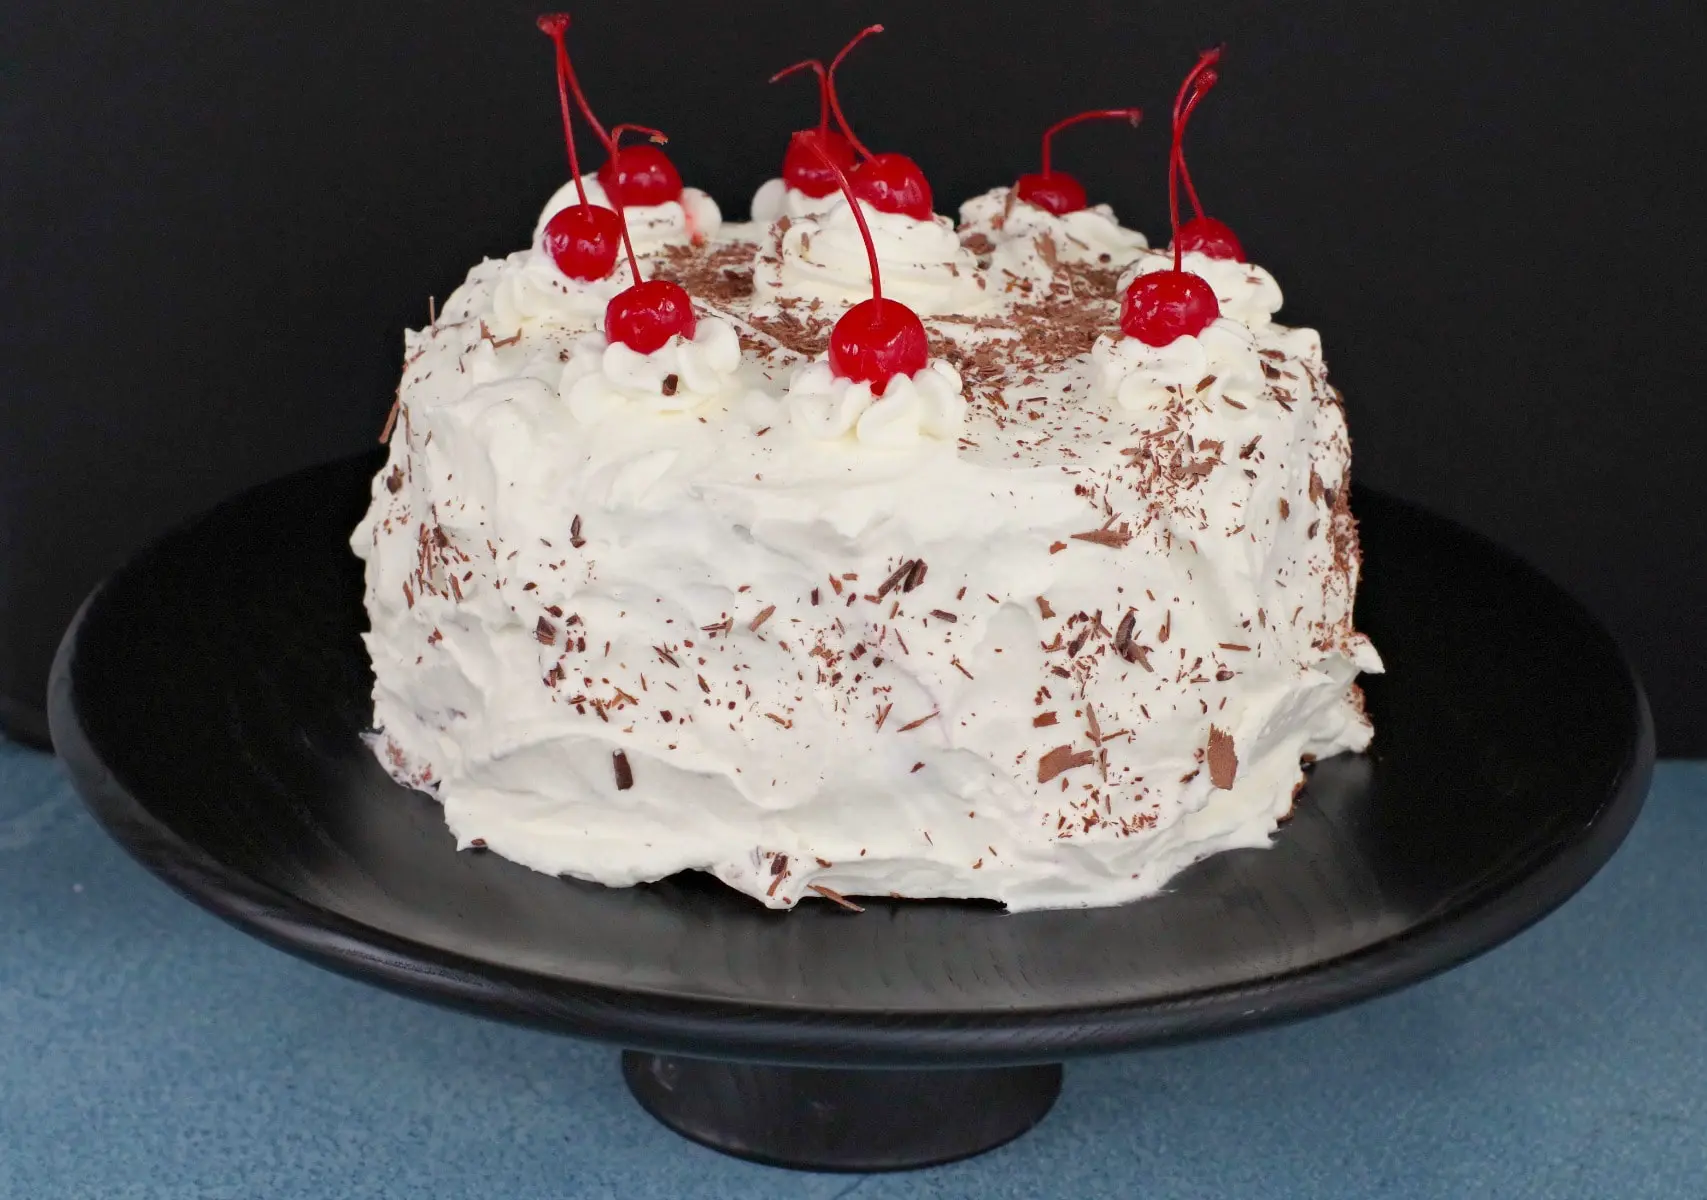 Whole black forest cake on black stand